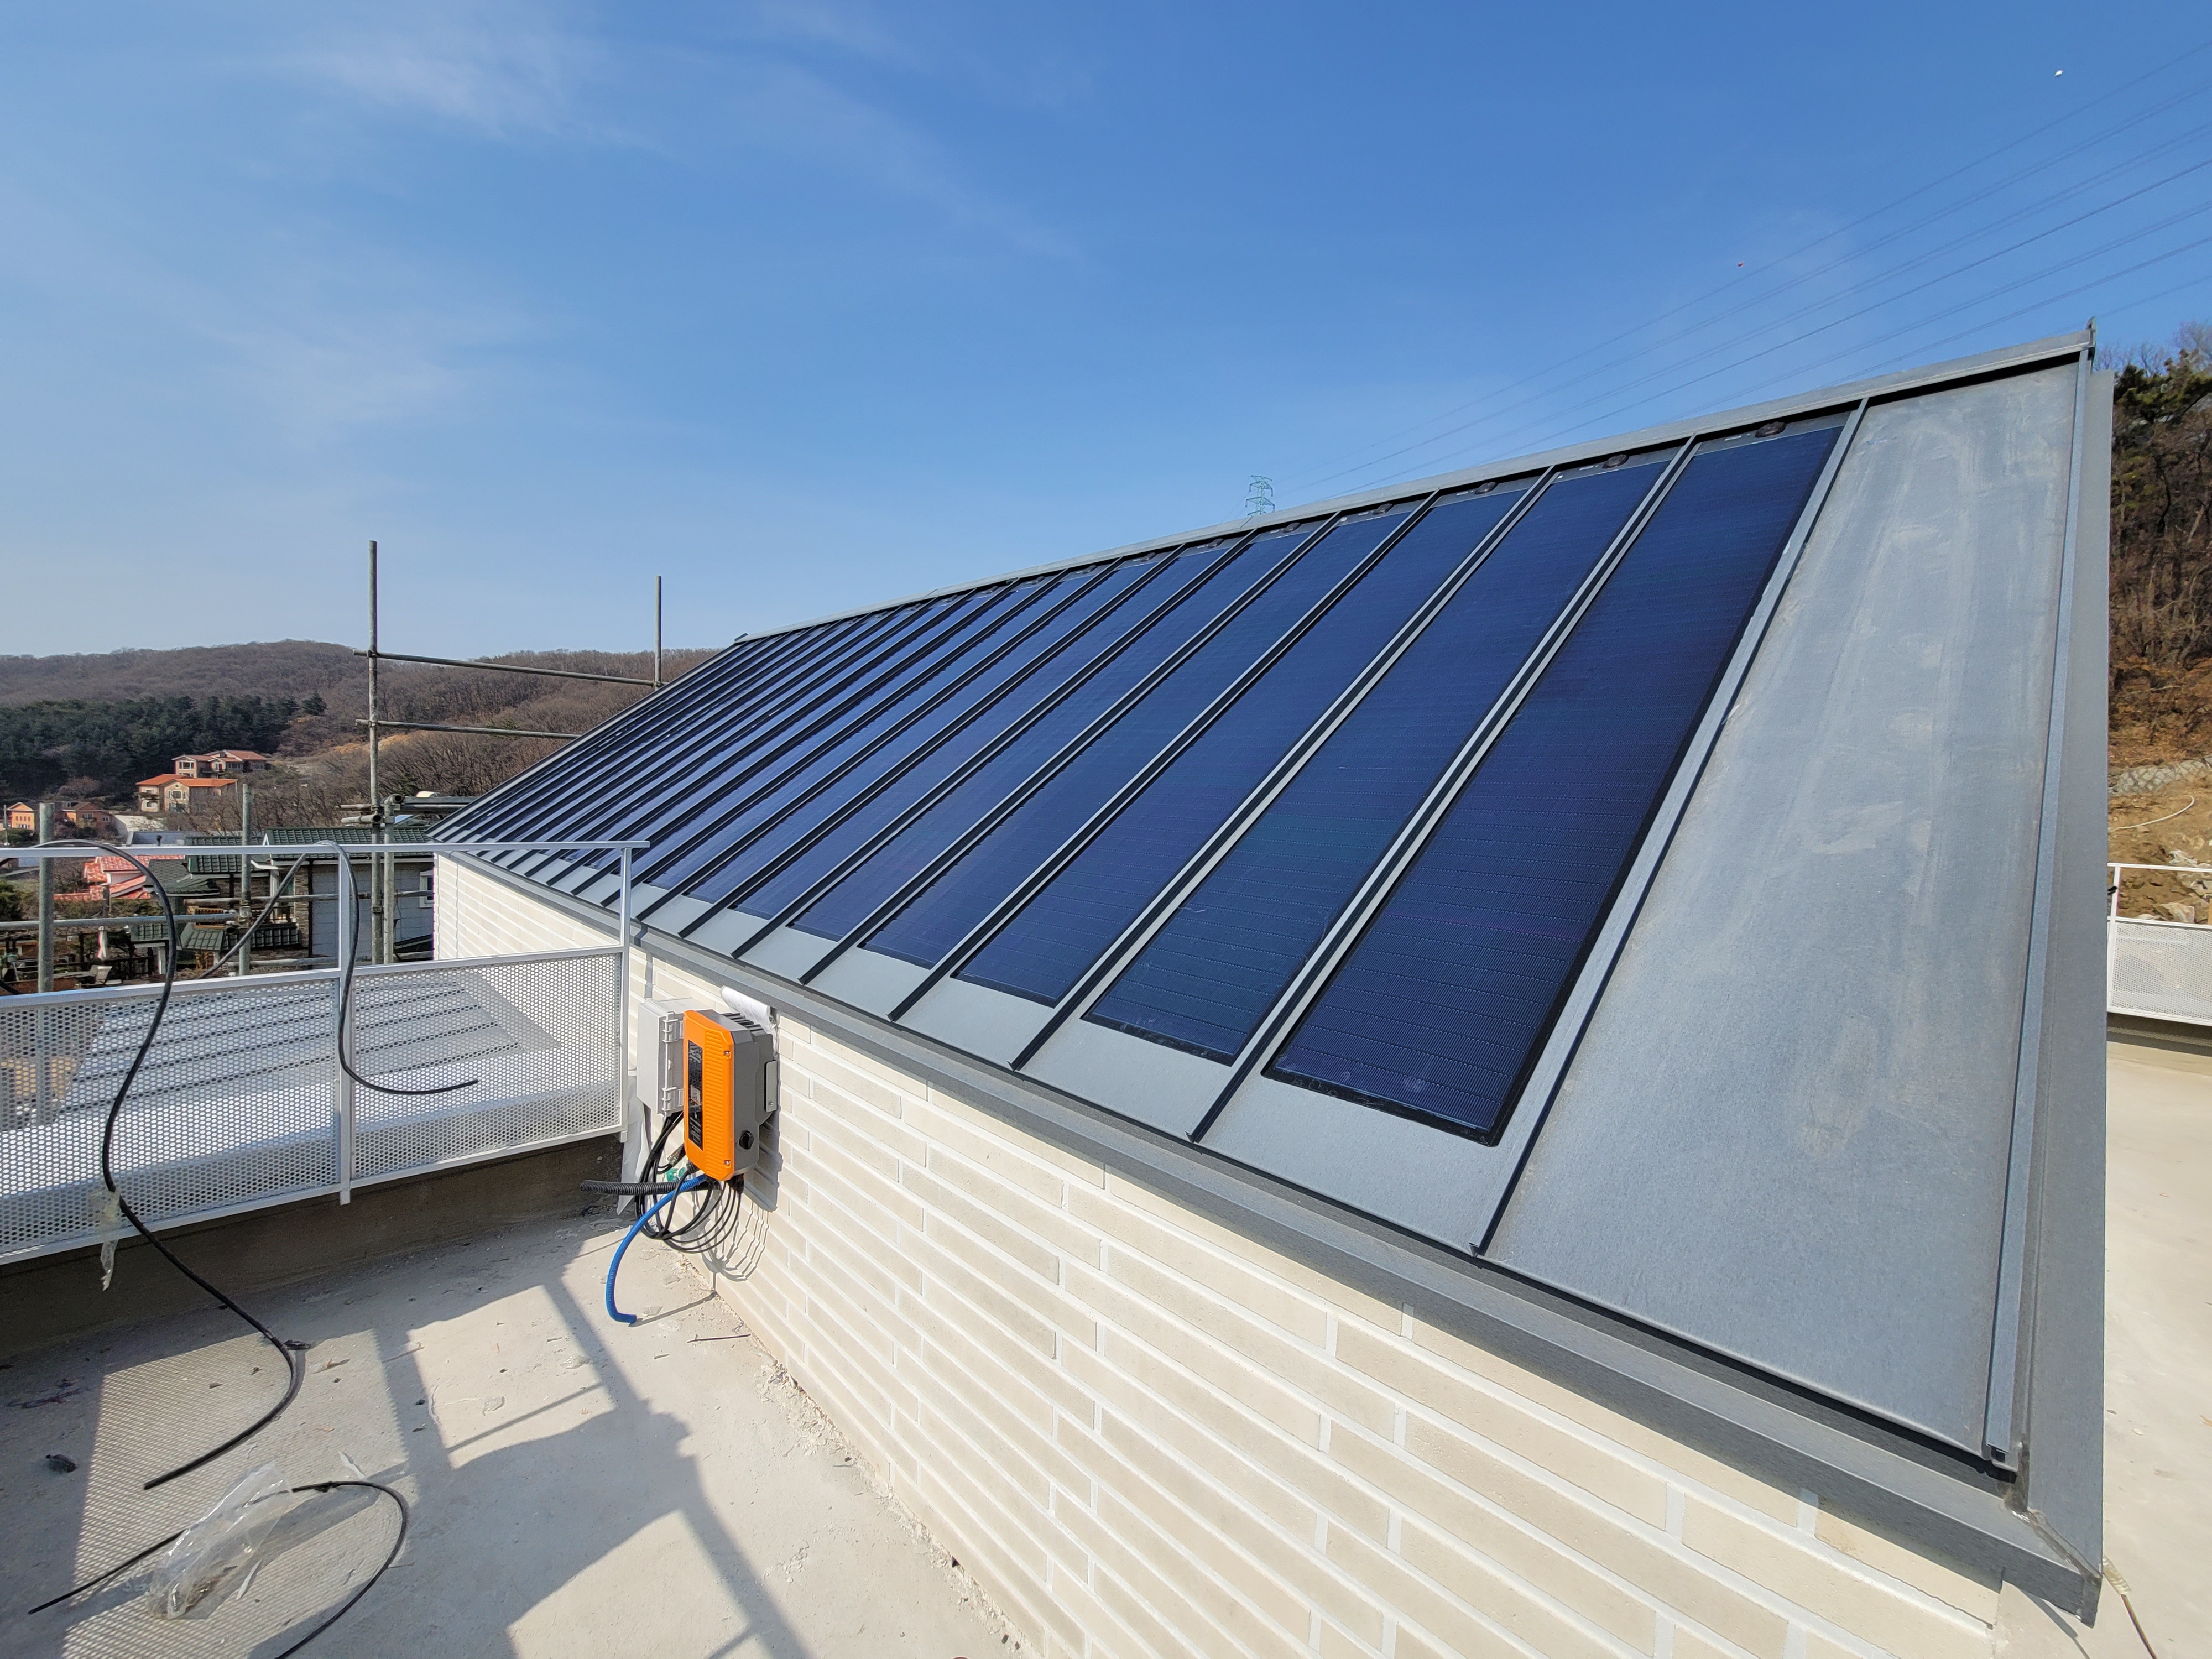 Roof integrated photovoltaic power generation system [첨부 이미지4]